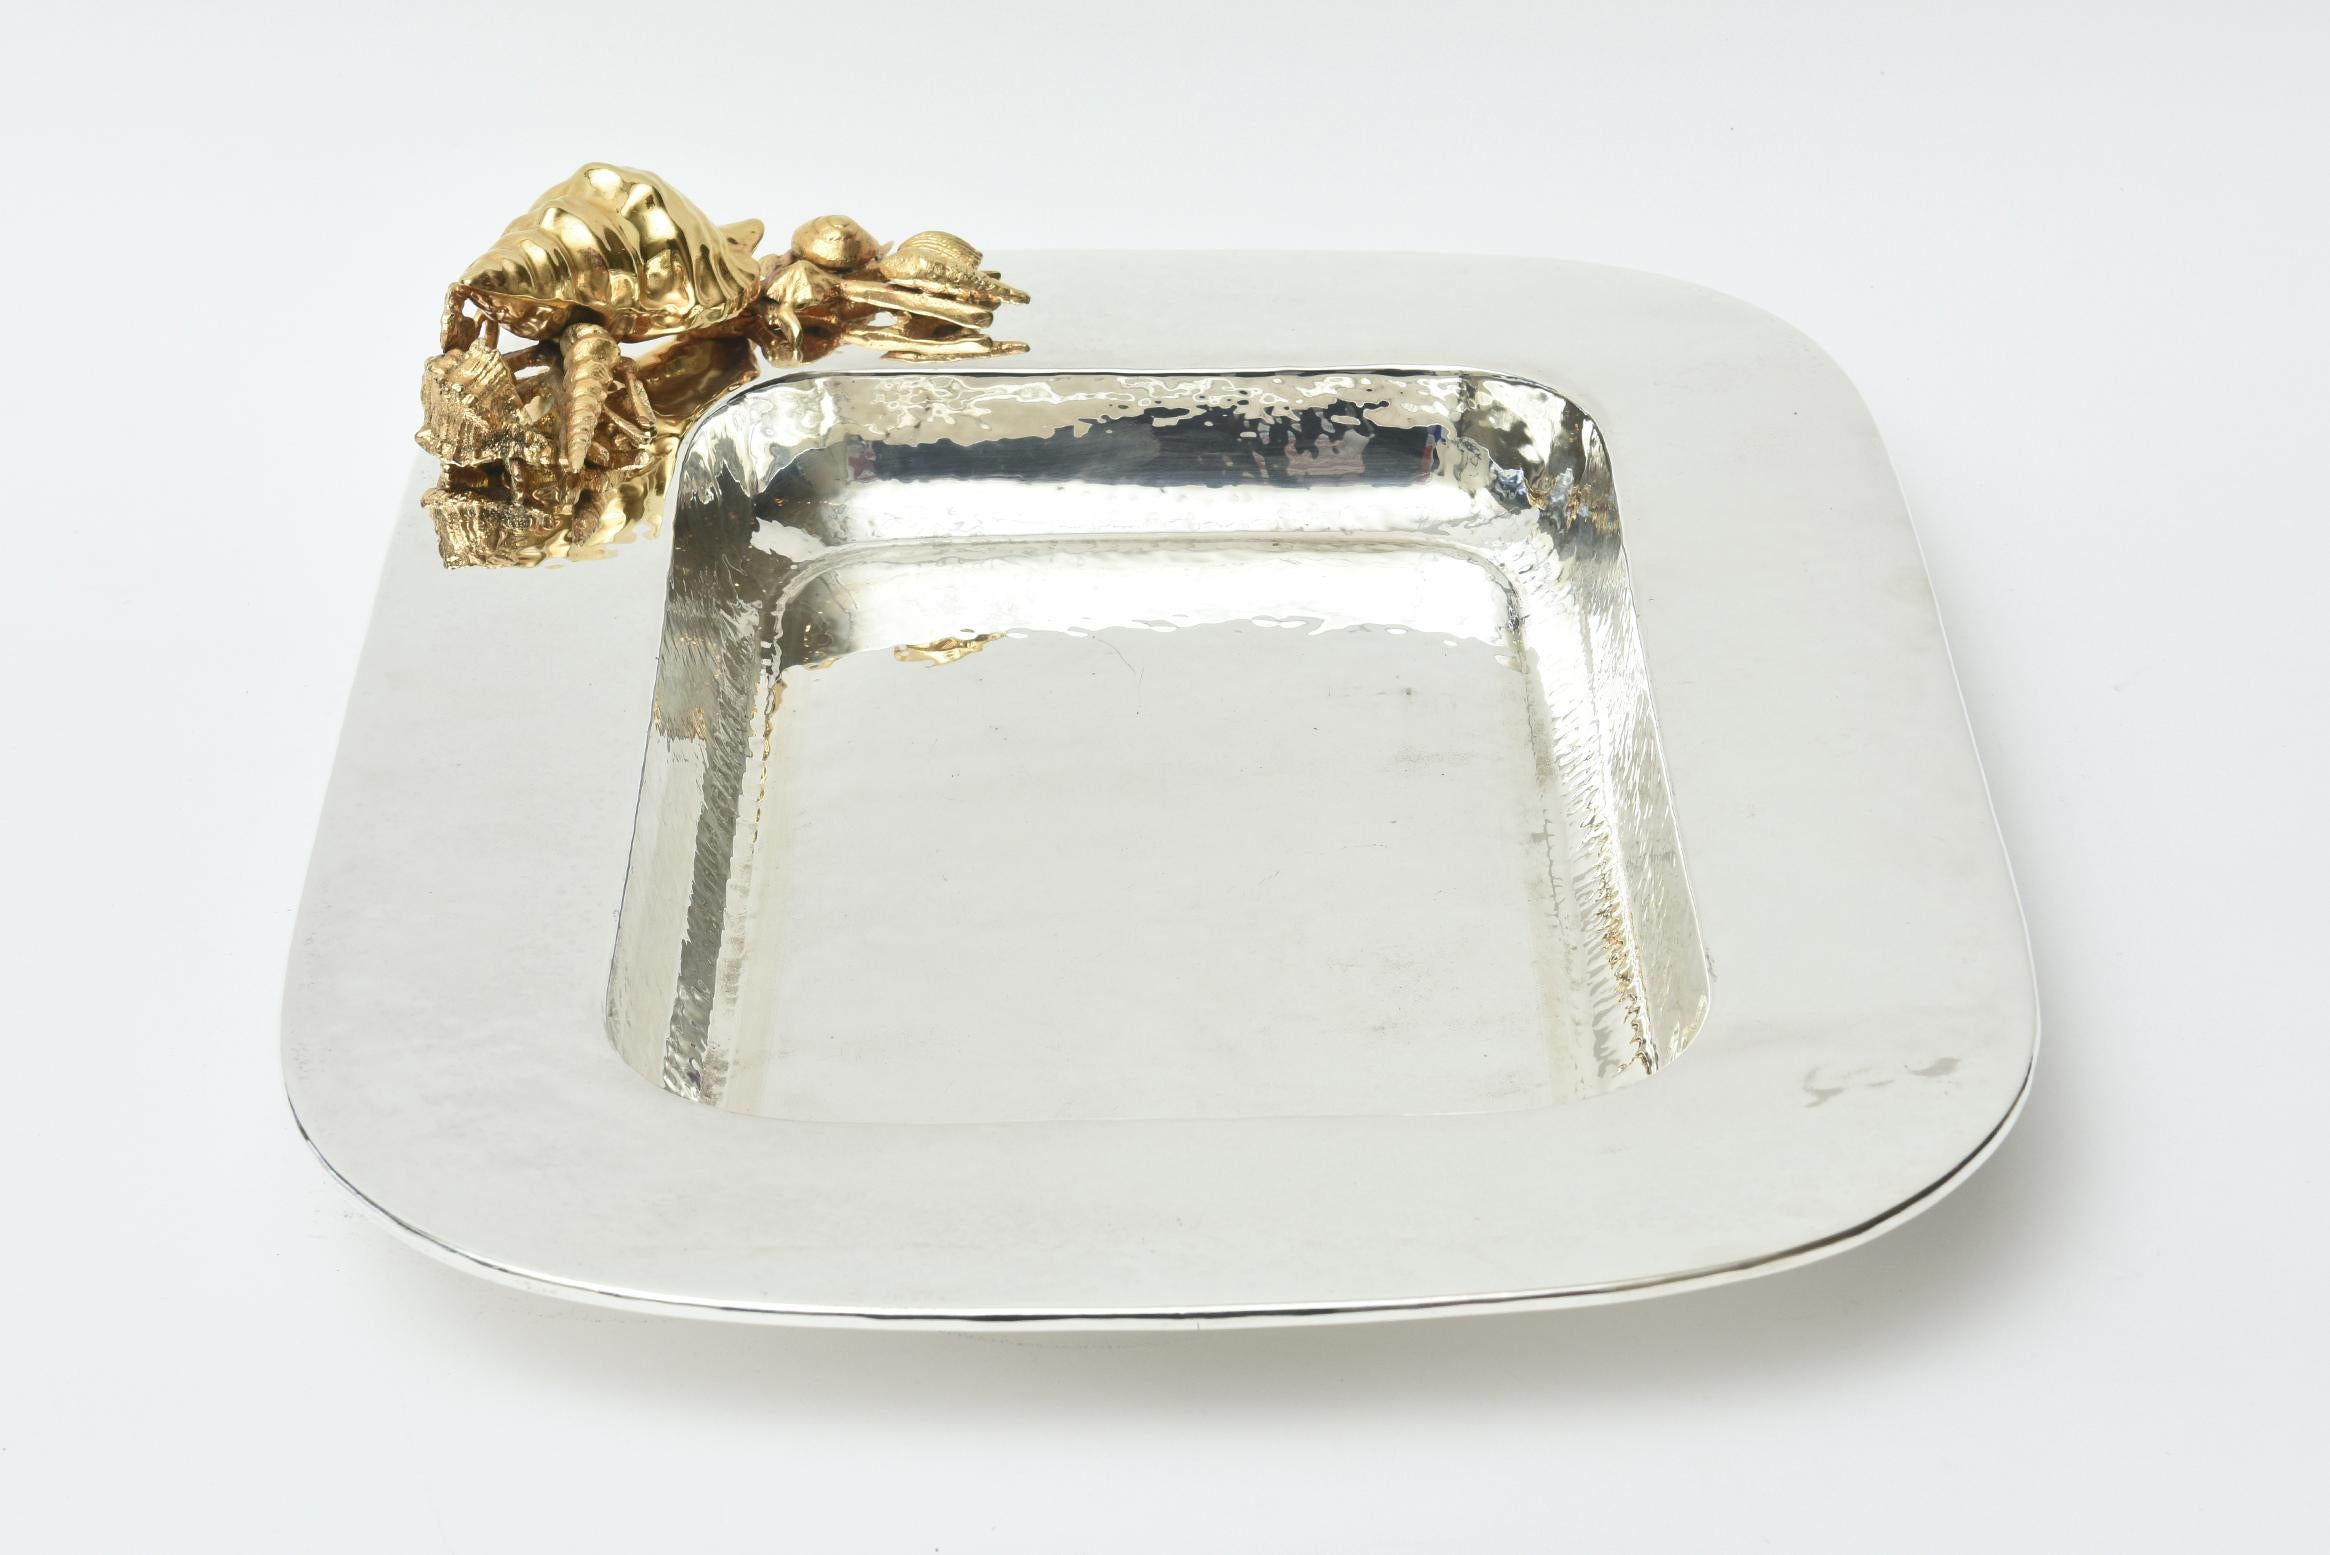 Organic Modern Hand-Hammered Silver-Plate and 24-Carat Gold-Plated Sea Shell Tray Signed